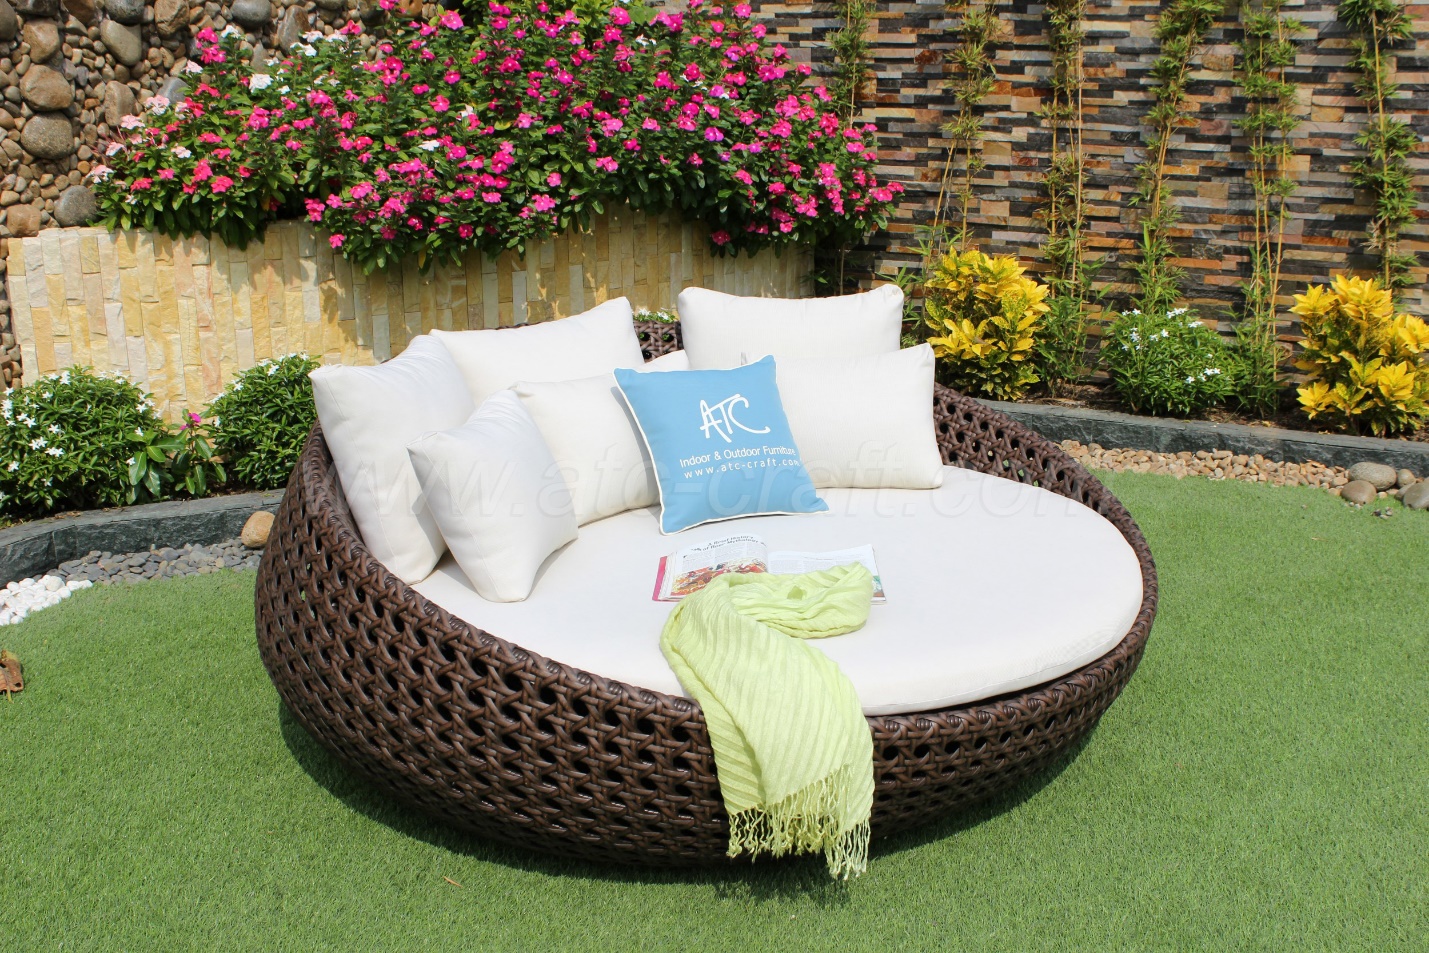 Wicker sunbeds beds for enjoying the sun - by atc patio furniture